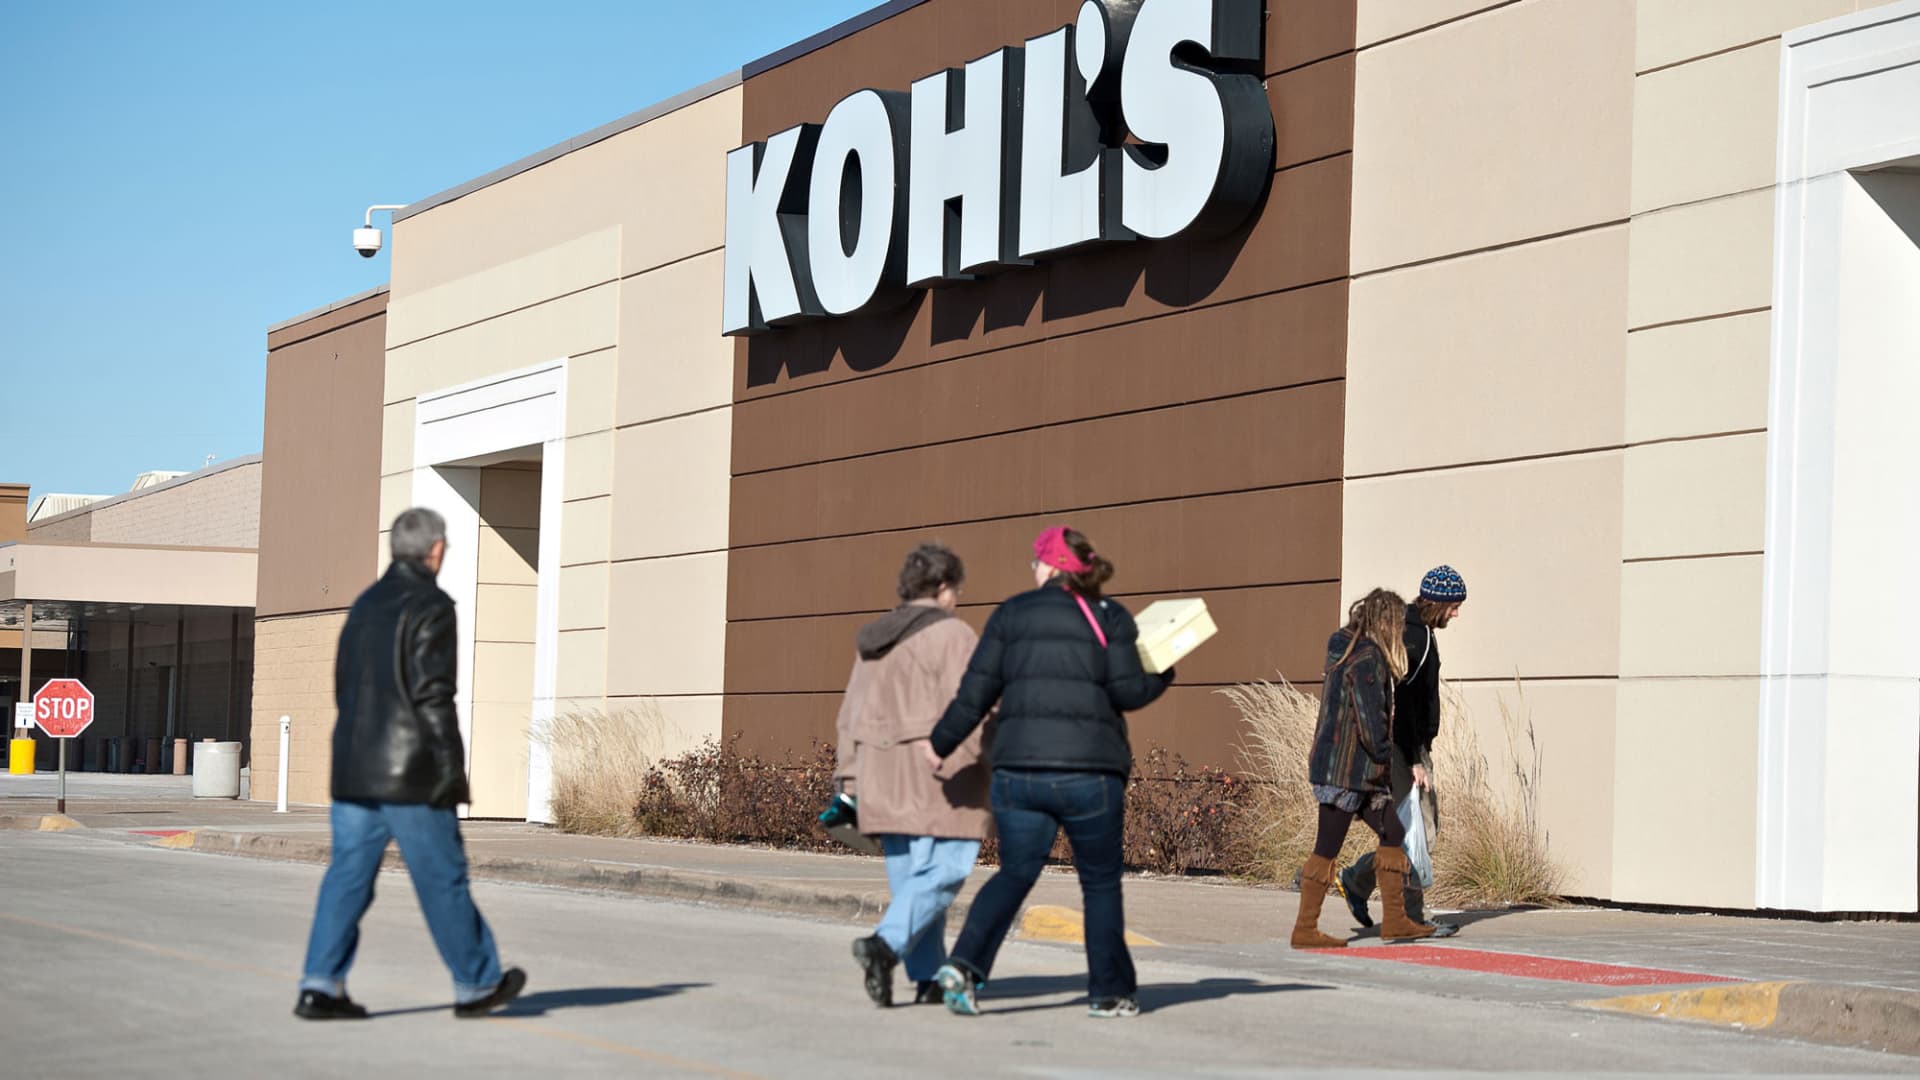 Here’s why Vitamin Shoppe’s owner wants to buy Kohl’s – and what could happen next